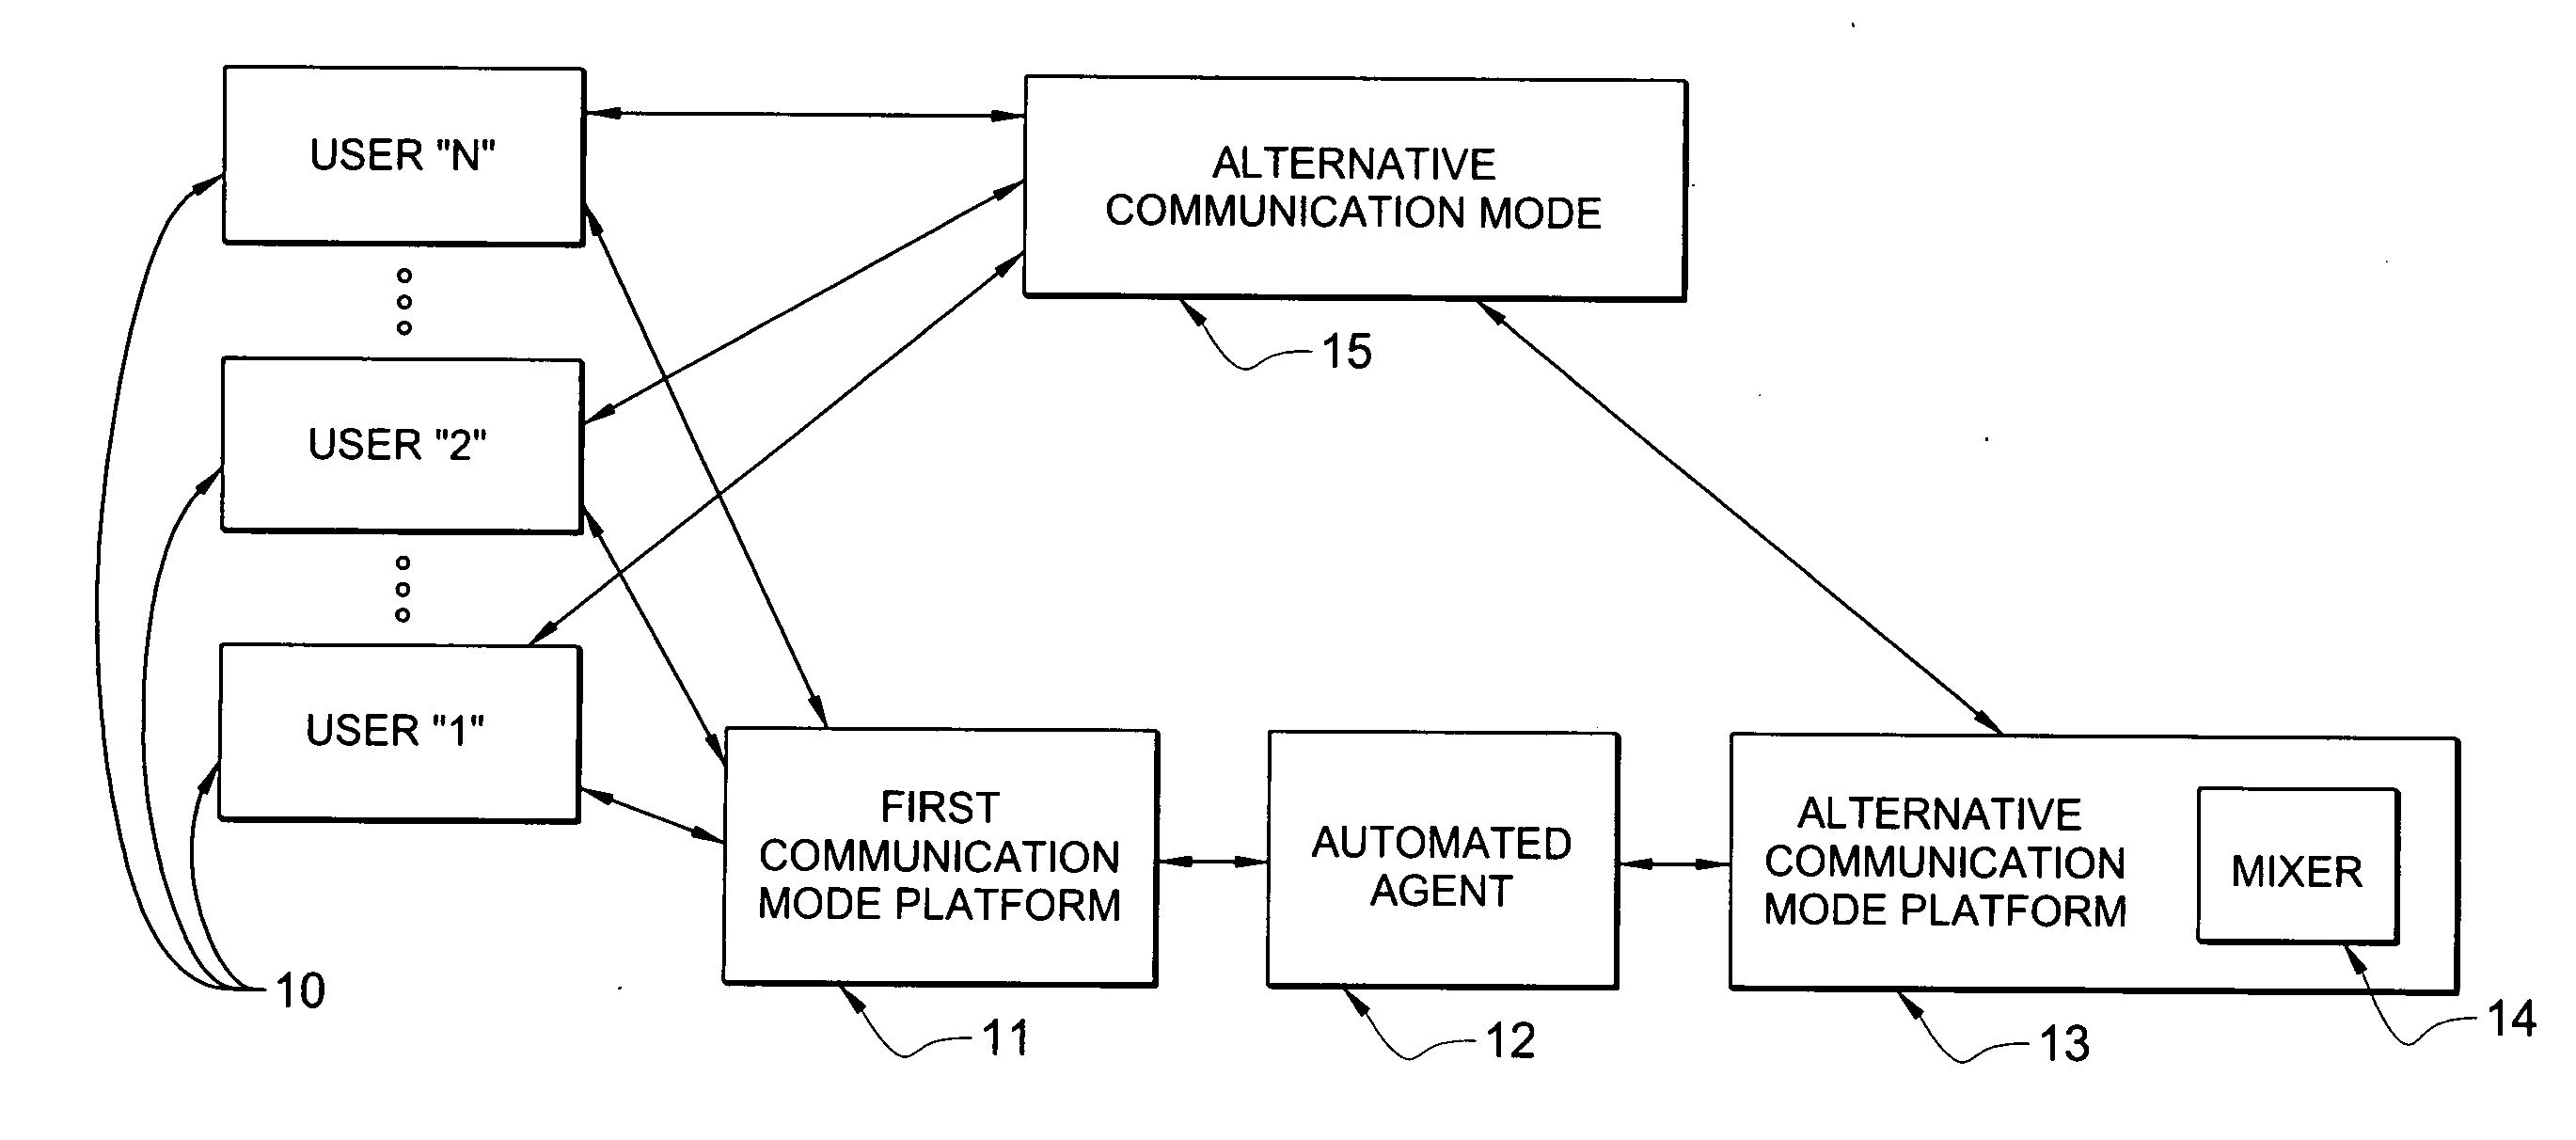 Voice conference control from an instant messaging session using an automated agent